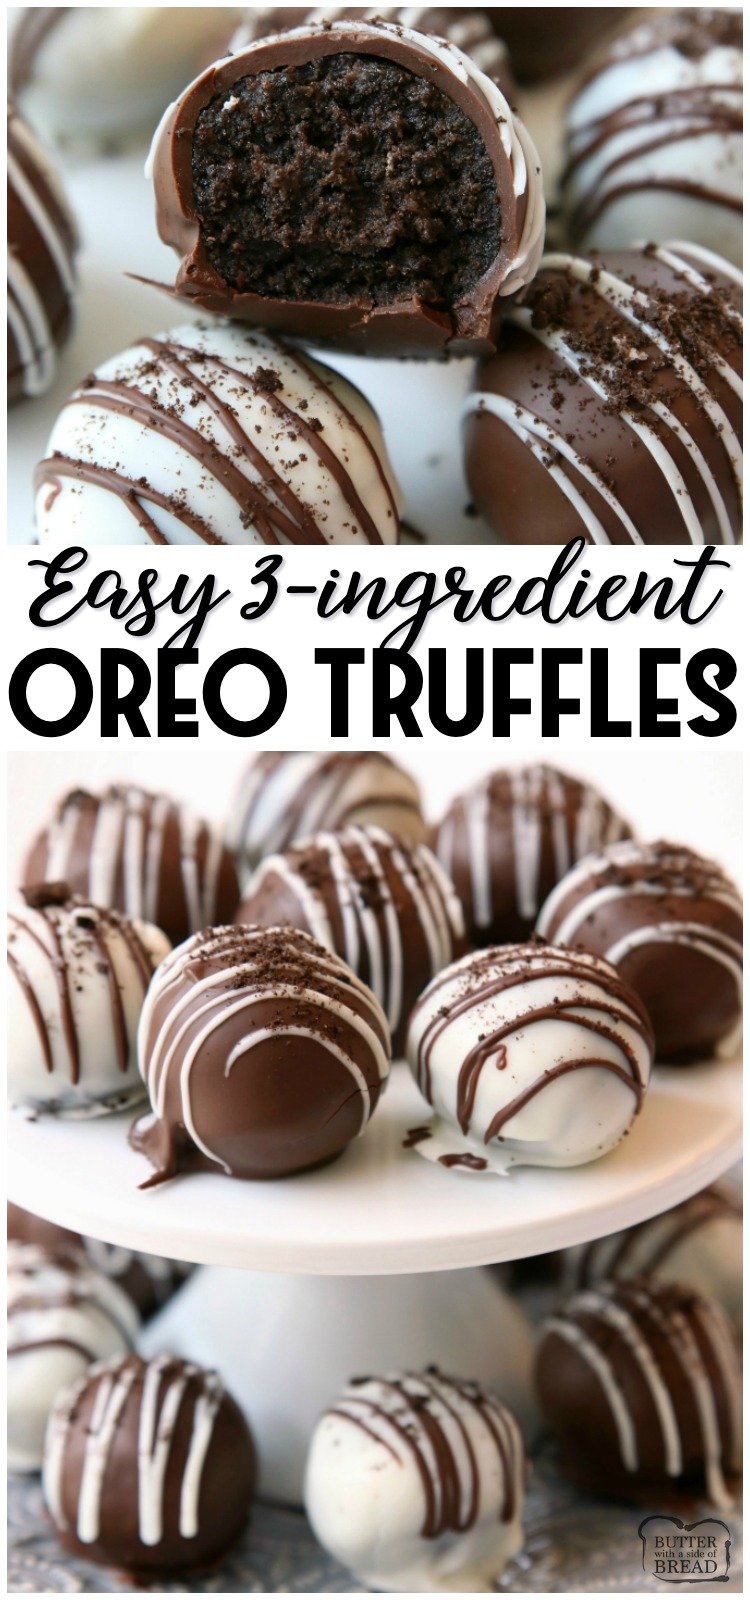 Oreo Balls made with just 3 ingredients & perfect easy dessert! Oreo Truffles made in minutes and so delicious, no one can guess they’re made with Oreo cookies! #oreo #truffles #easy #dessert #chocolate #recipe from BUTTER WITH A SIDE OF BREAD